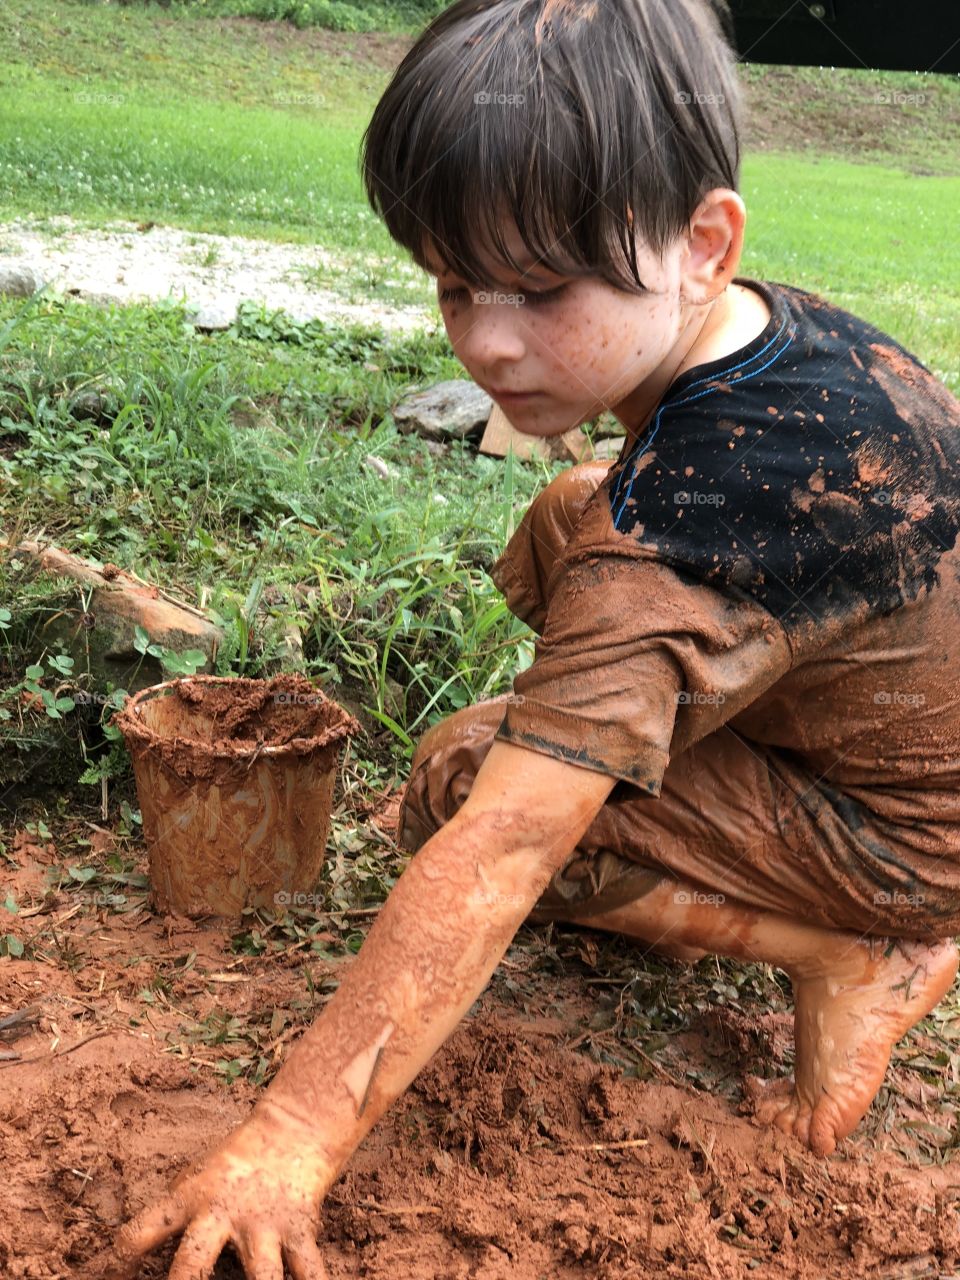 Just a boy and his mud